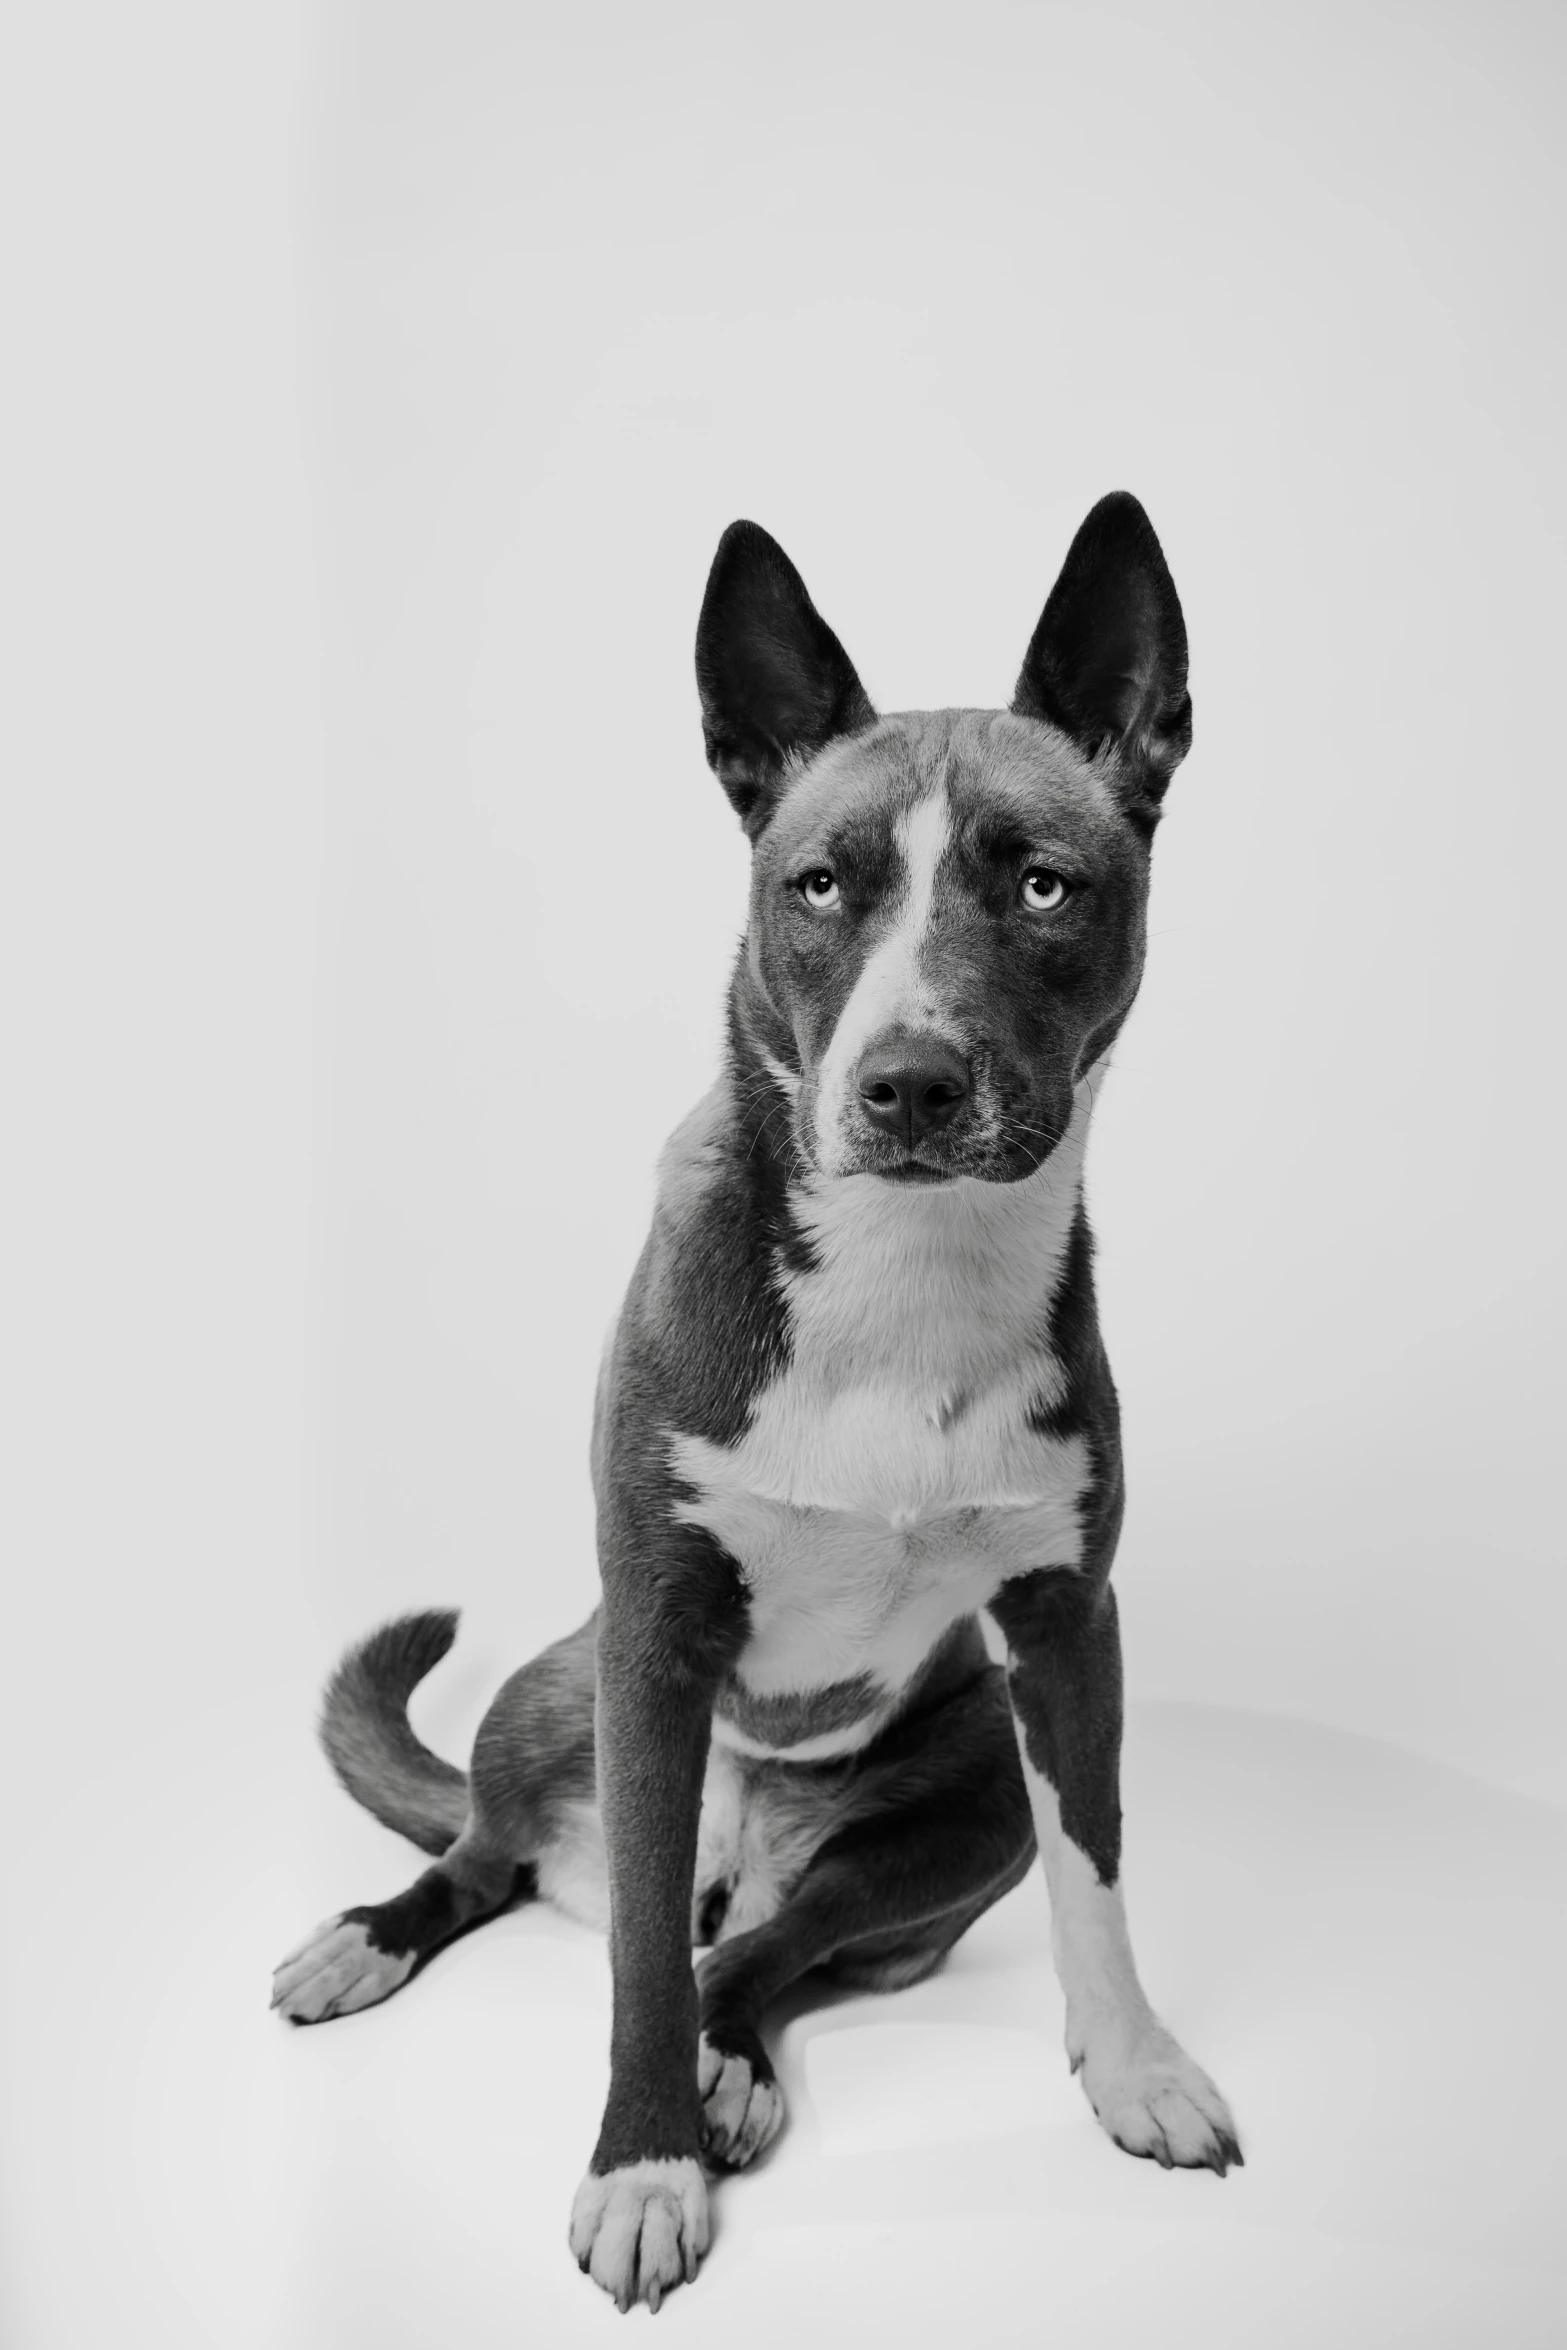 a dog poses with its legs crossed and a white background